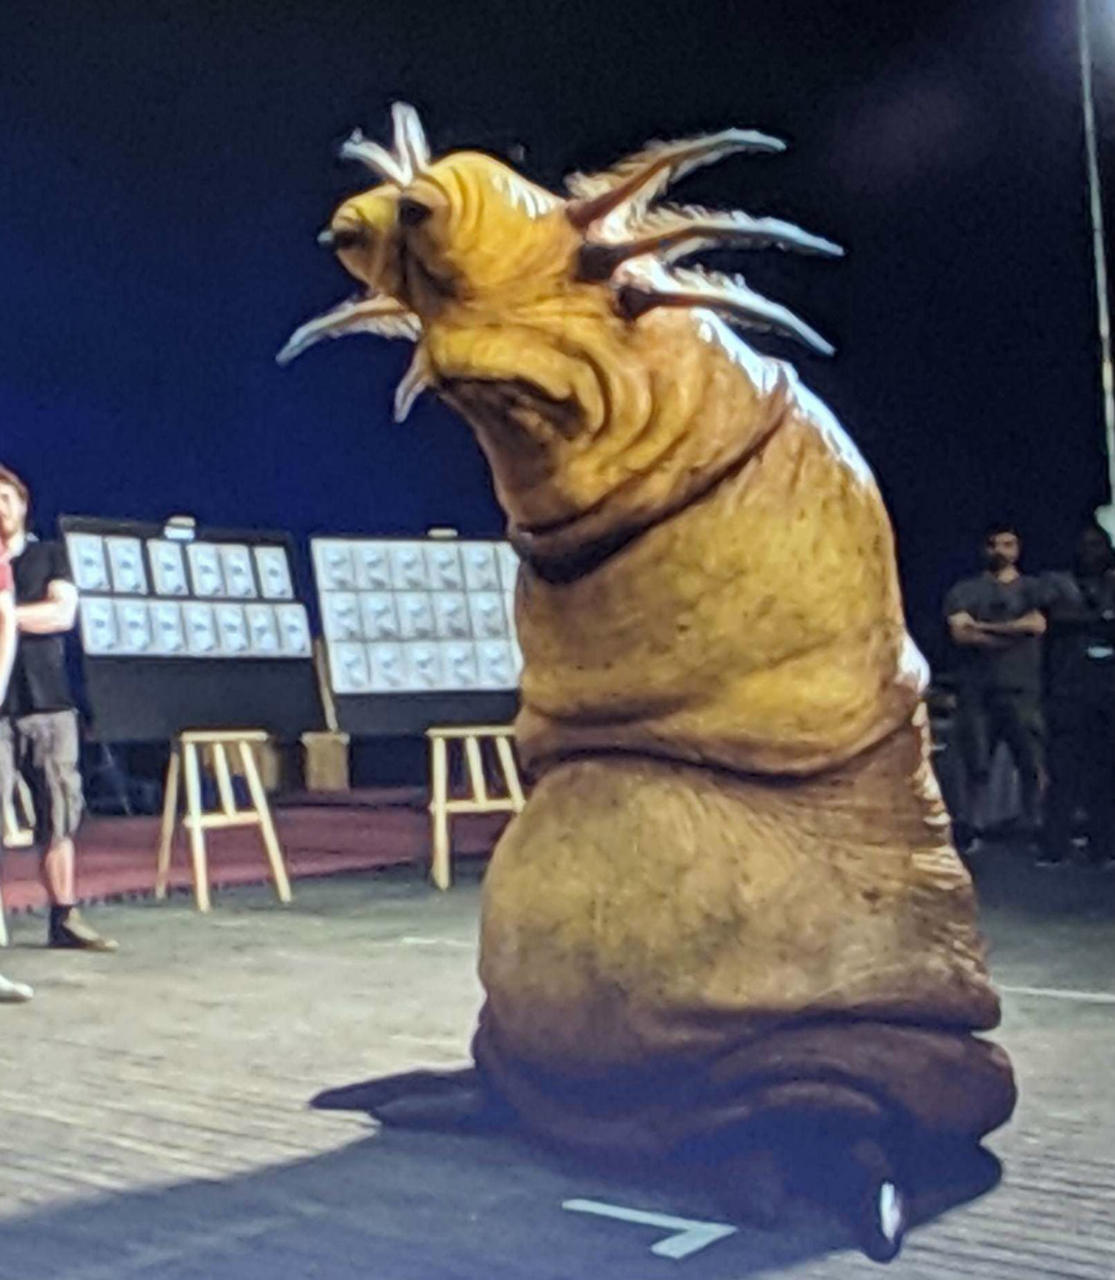 A behind-the-scenes image of an alien in the movie